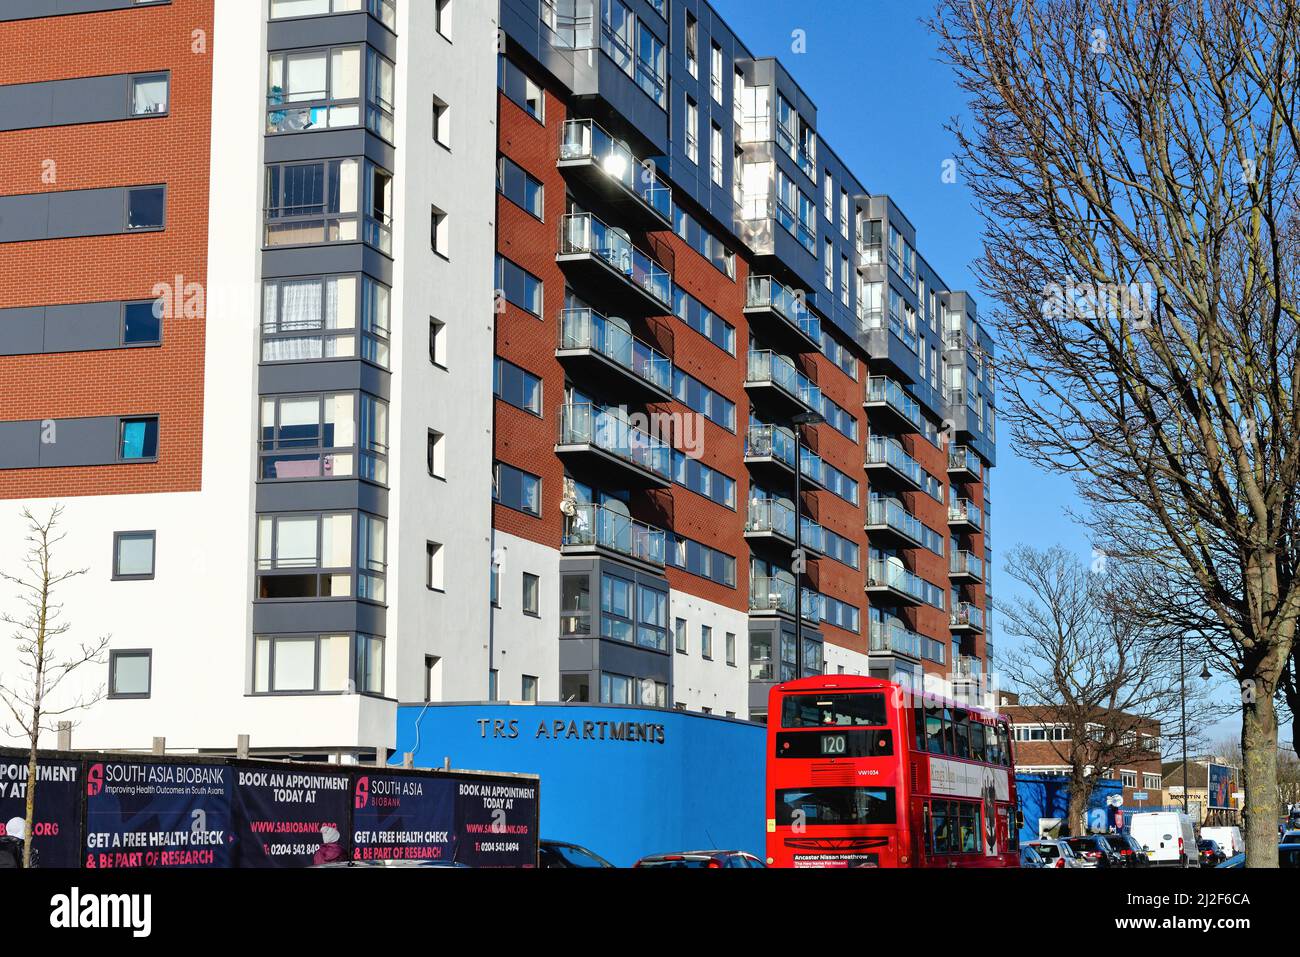 Die modernen TRS Apartments im Green Southall West London England Stockfoto